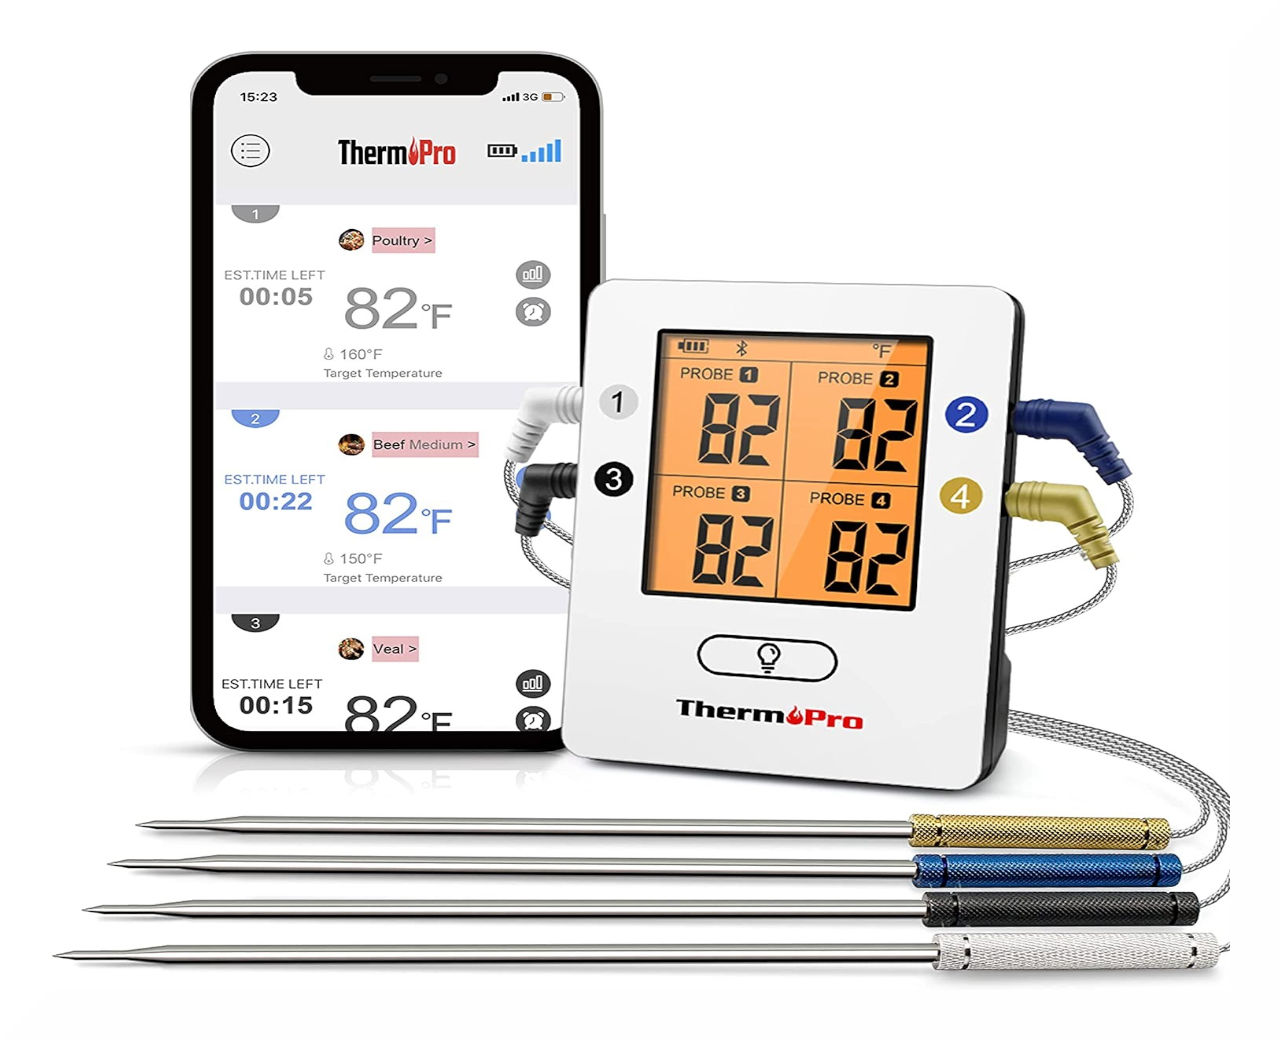 ThermoPro TP25 Multi Probe Meat Thermometer, , hi-res image number null